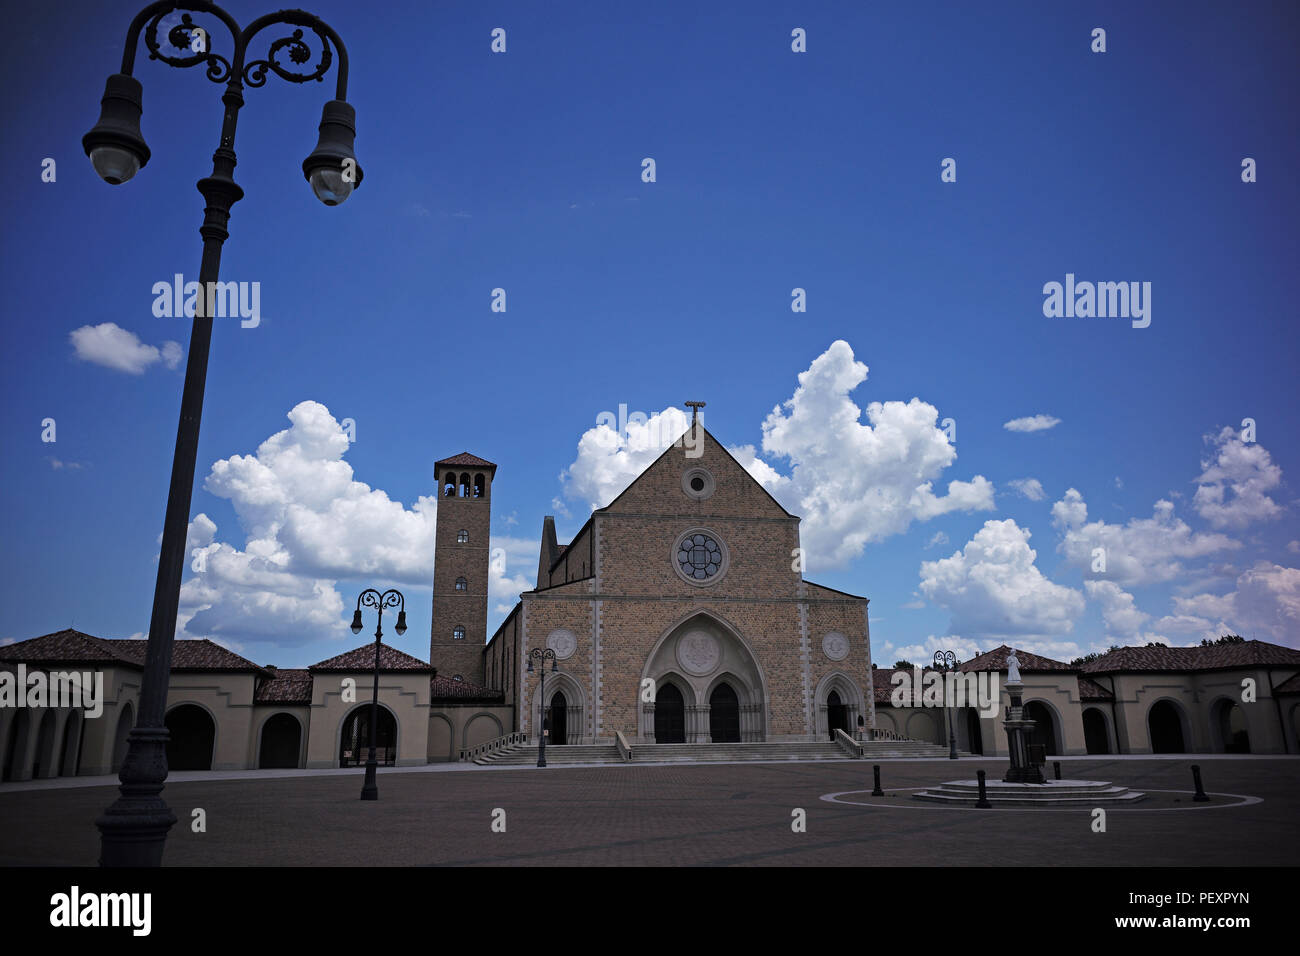 Shrine of the Most Blessed Sacrament of Our Lady of the Angels Monastery, informally known as OLAM Shrine, is a prominent Roman Catholic shrine in AL Stock Photo